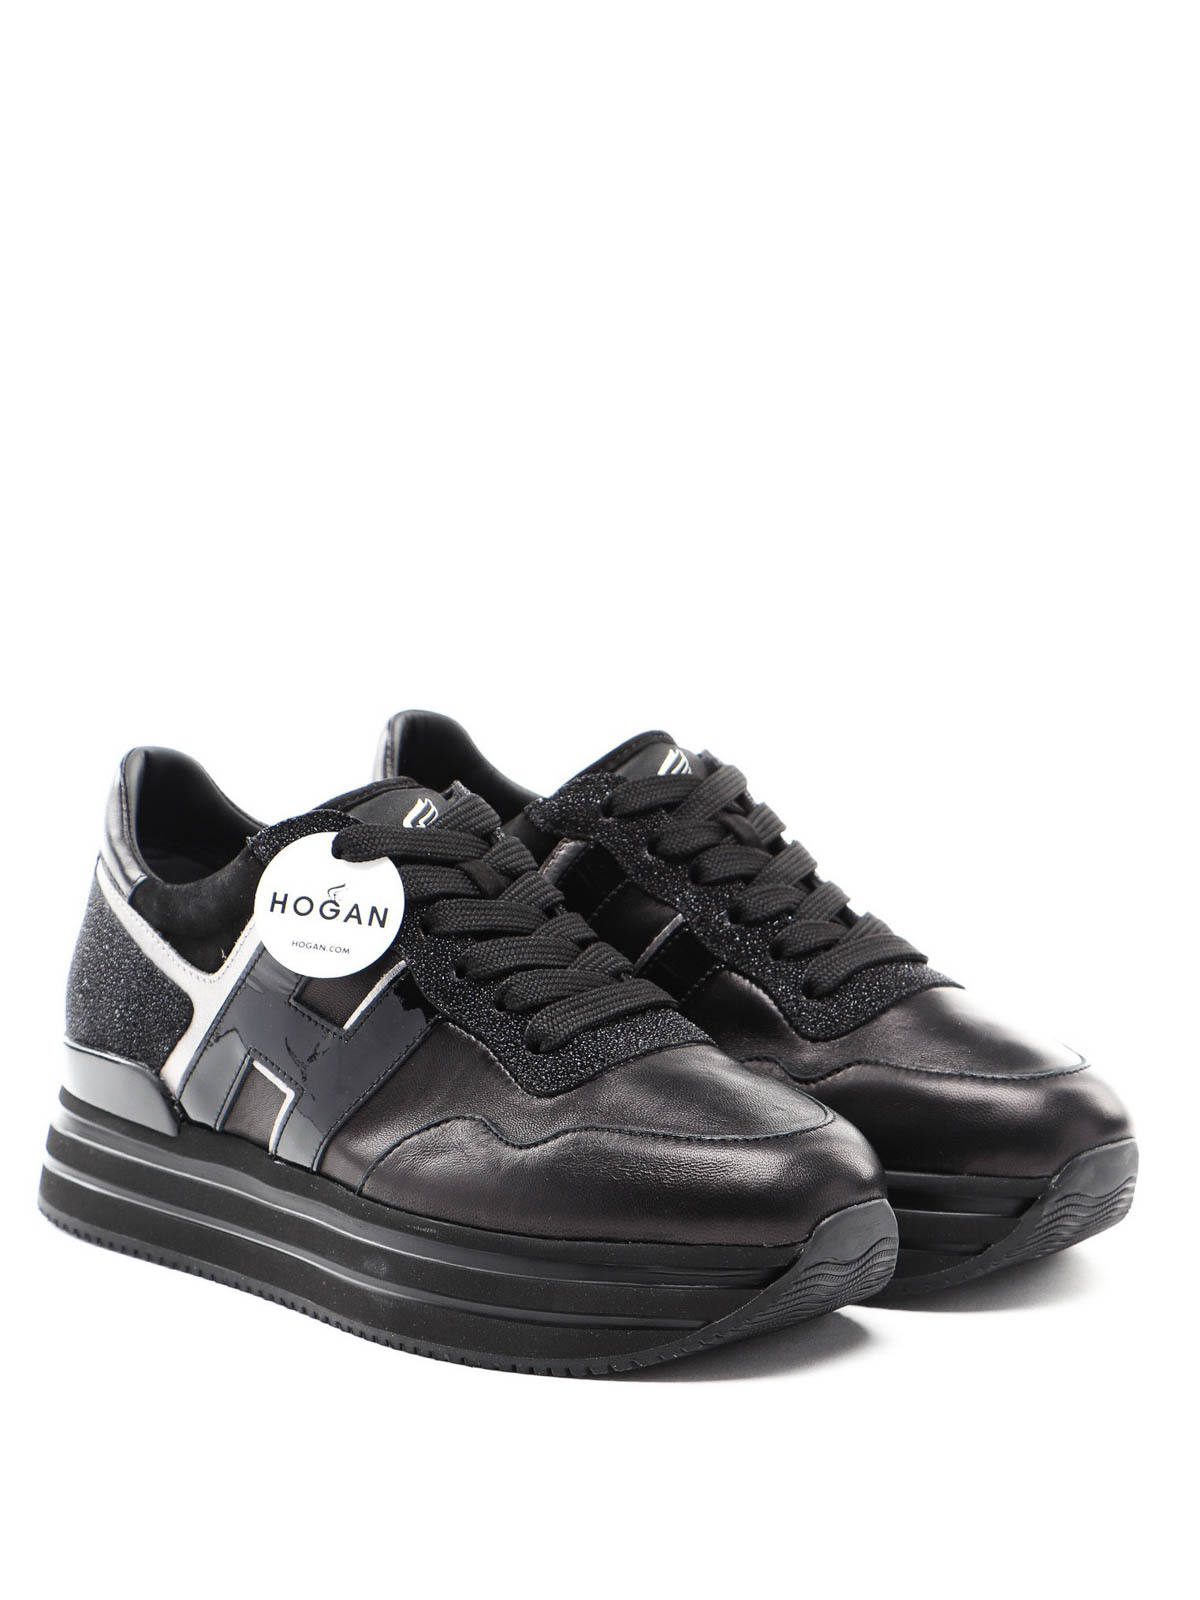 Shop Hogan H483 Leather And Glitter Sneakers In Black